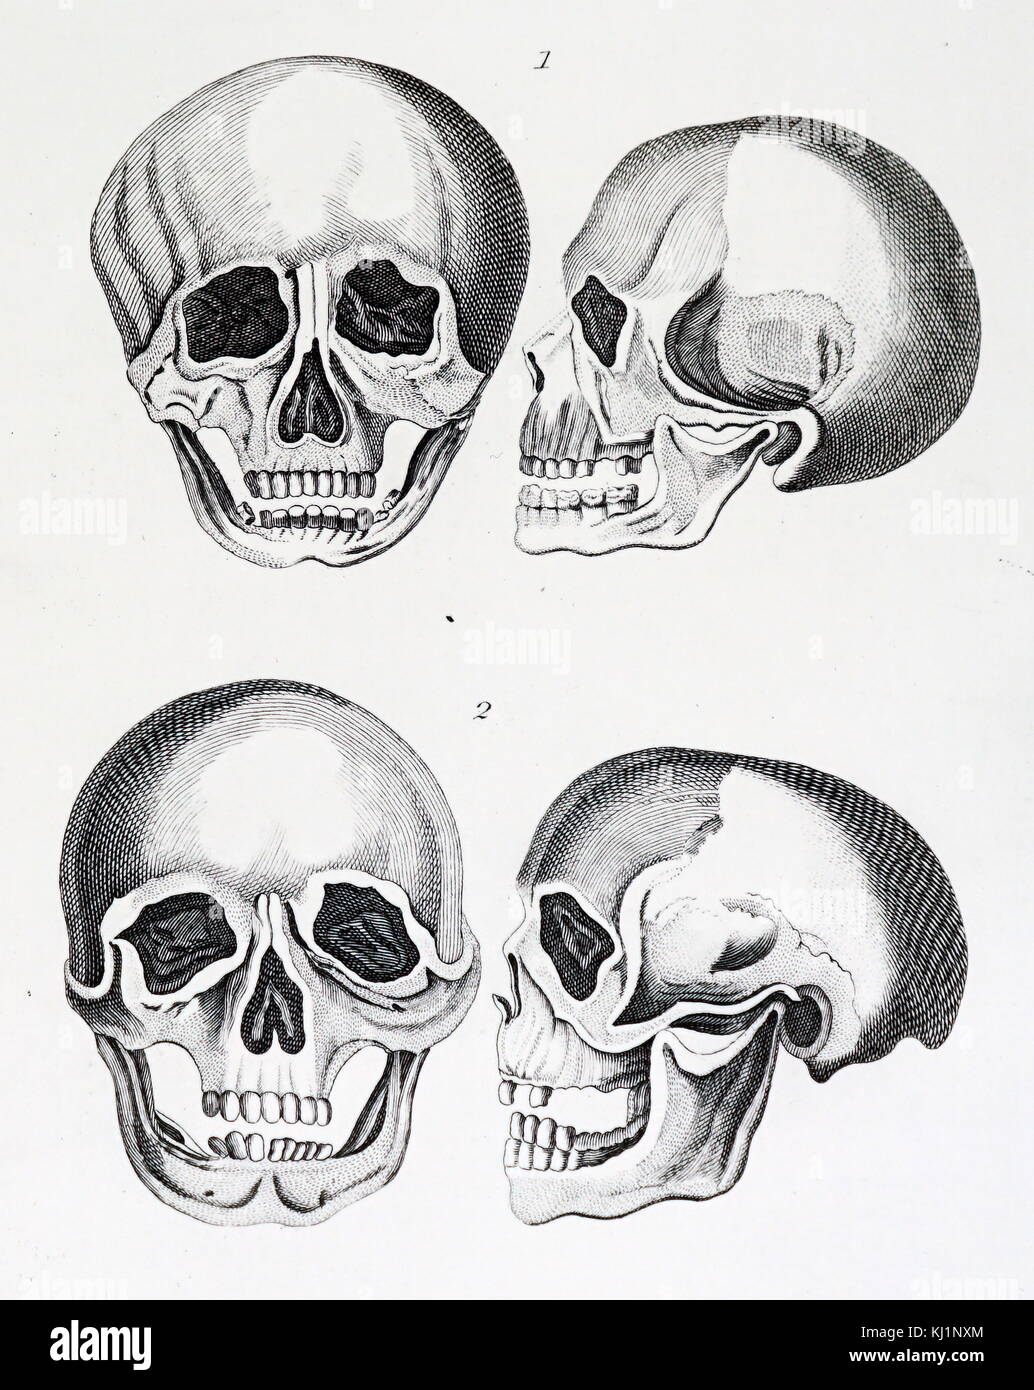 Illustration Depicting The Comparison Of Human Skulls Const Is A Skull Of Unknown Race From A Constantinople Cemetery Dated 19th Century Stock Photo Alamy